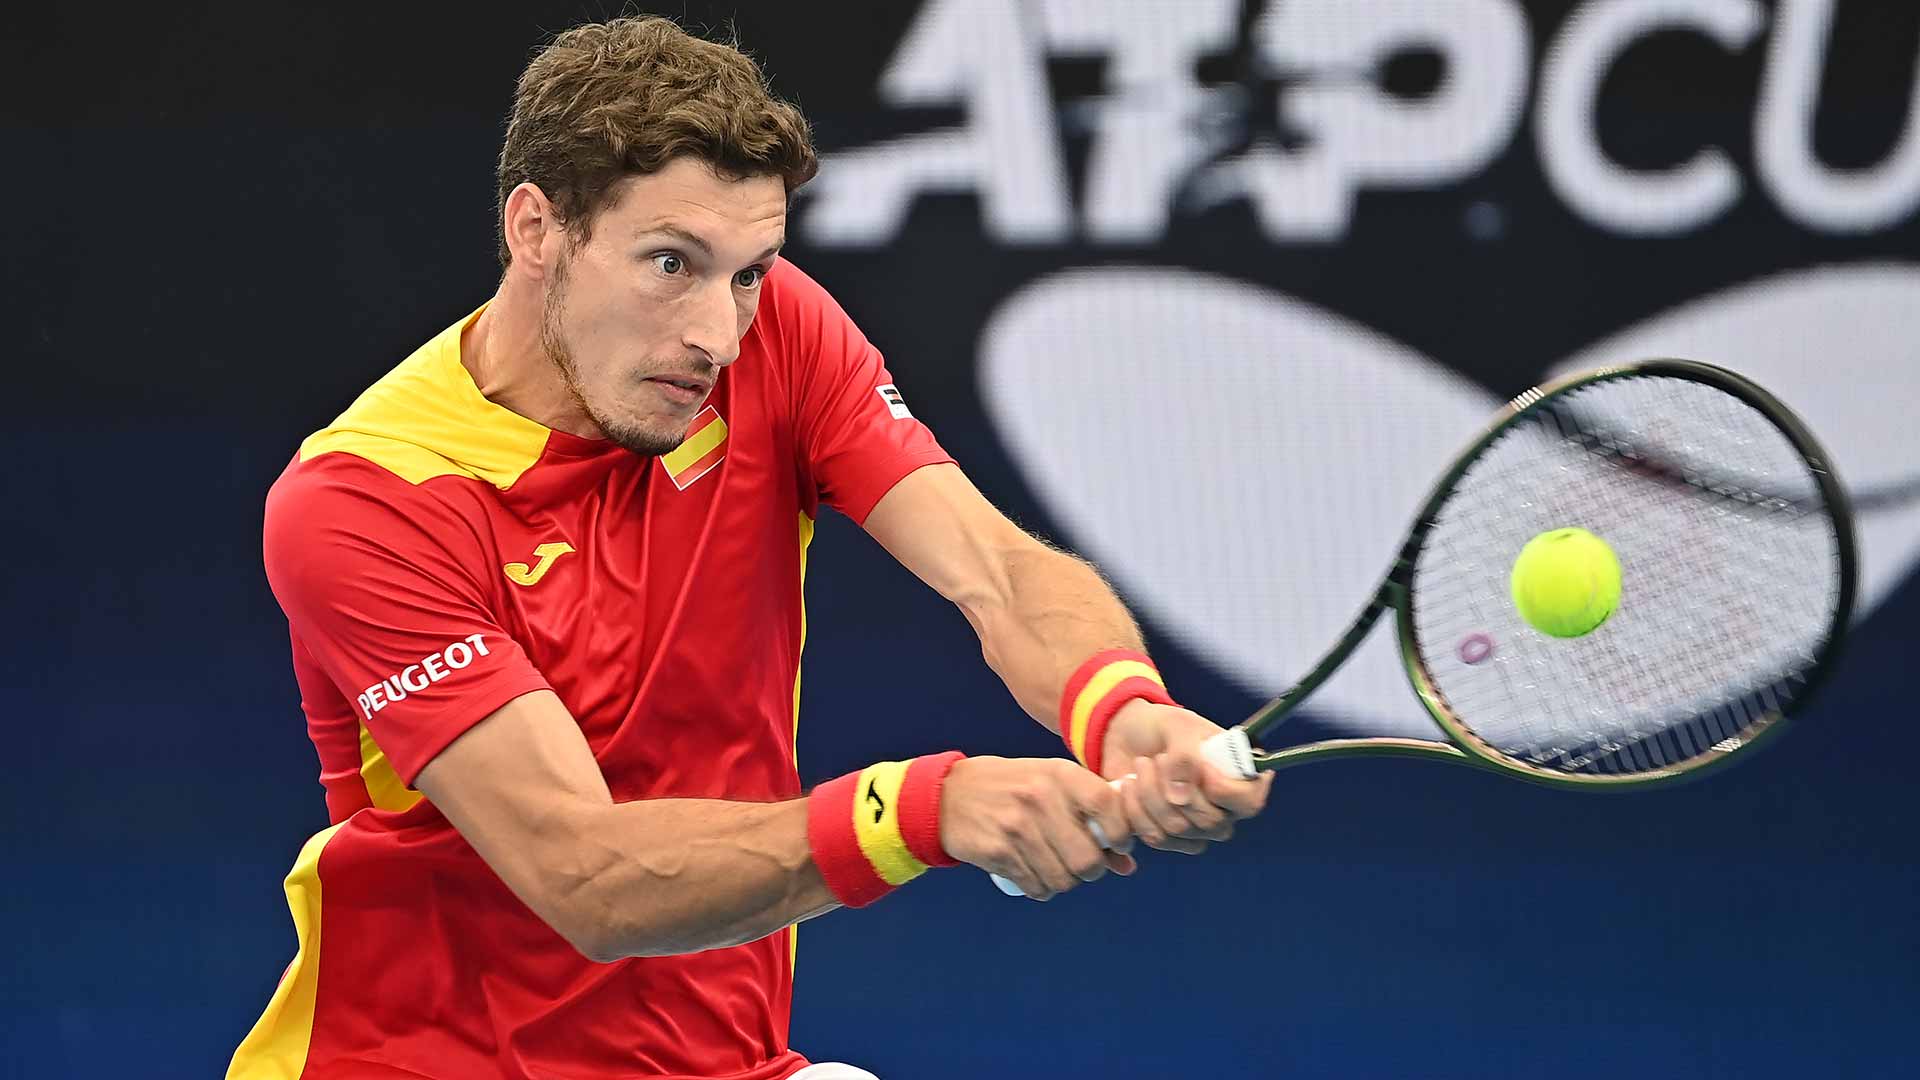 <a href='https://www.atptour.com/en/players/pablo-carreno-busta/cd85/overview'>Pablo Carreno Busta</a>  is Spain's No. 2 singles player at the 2022 <a href='https://www.atptour.com/en/tournaments/atp-cup/8888/overview'>ATP Cup</a>.